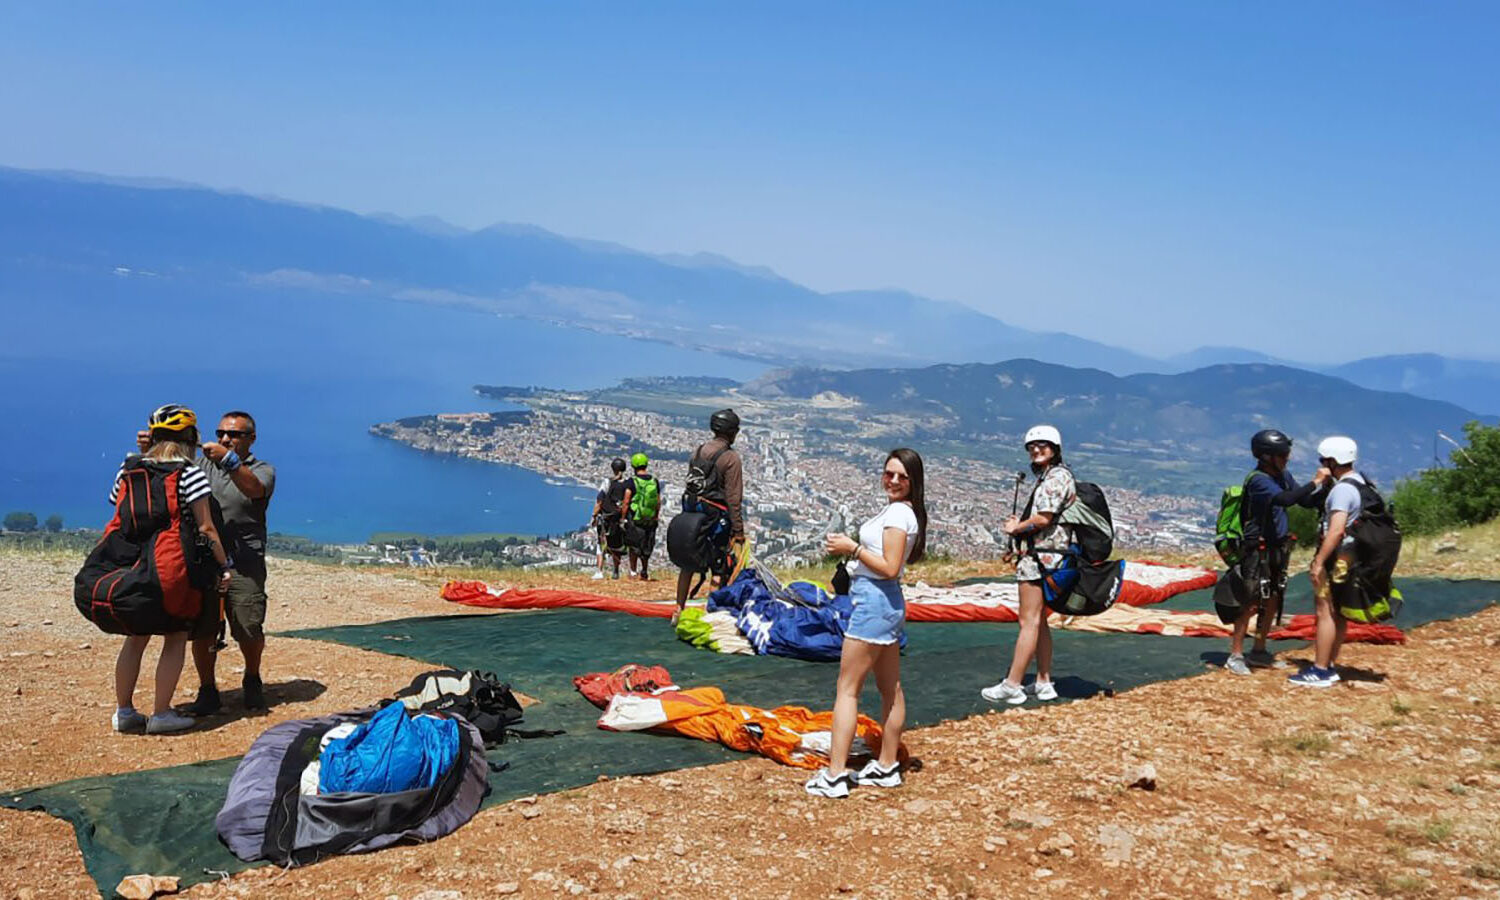 Paragliding Ohrid - preparation at the take-off